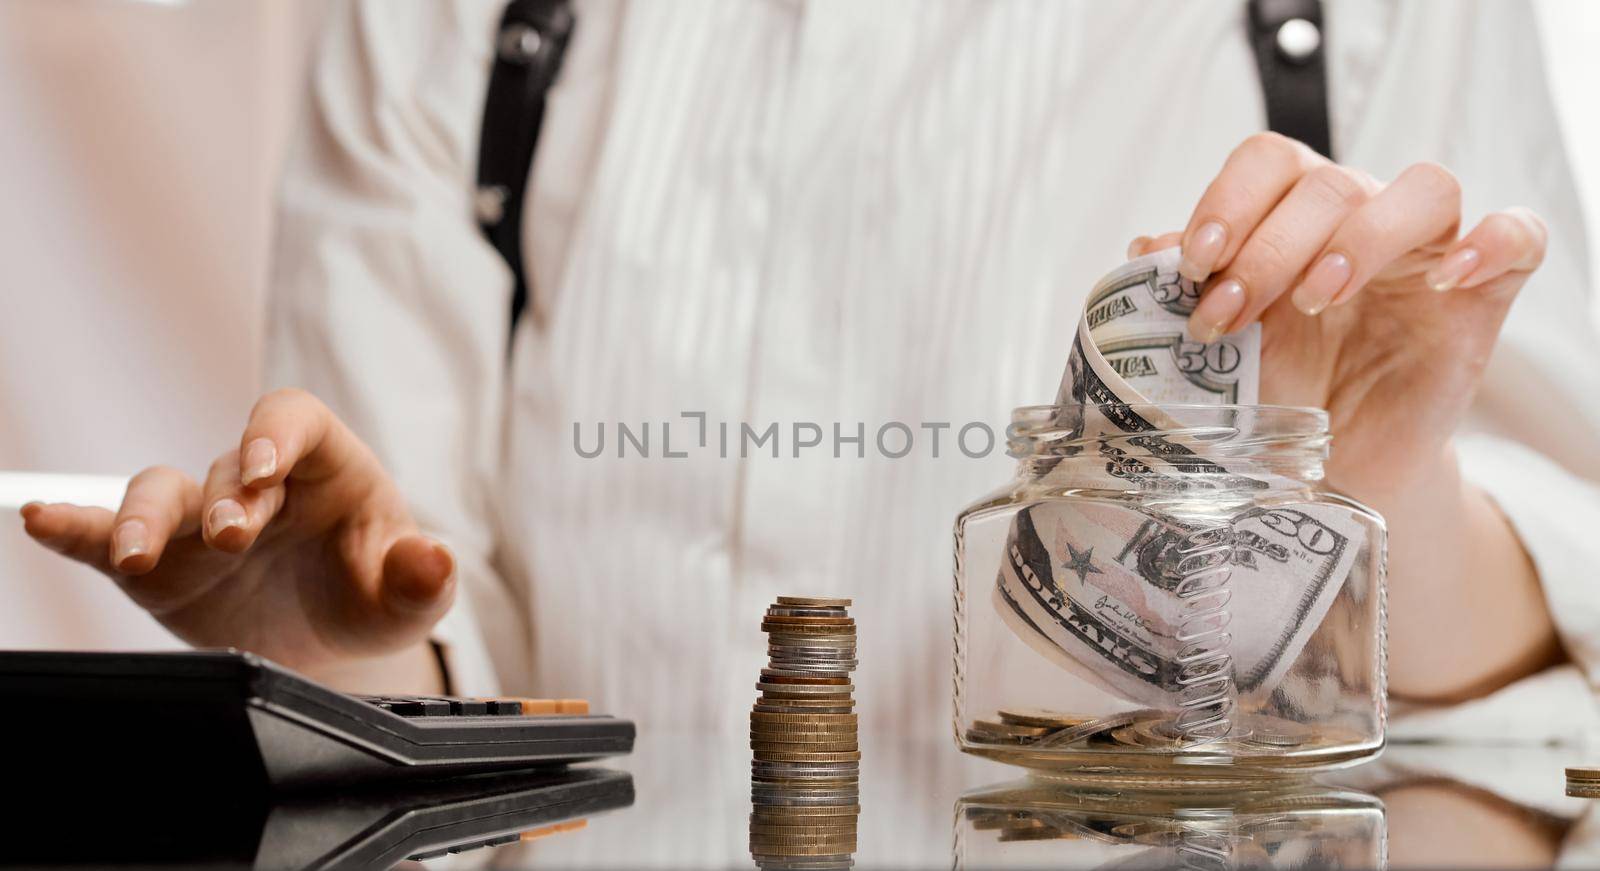 The woman counts the money and puts it in a glass jar on the mirrored table. High quality photo